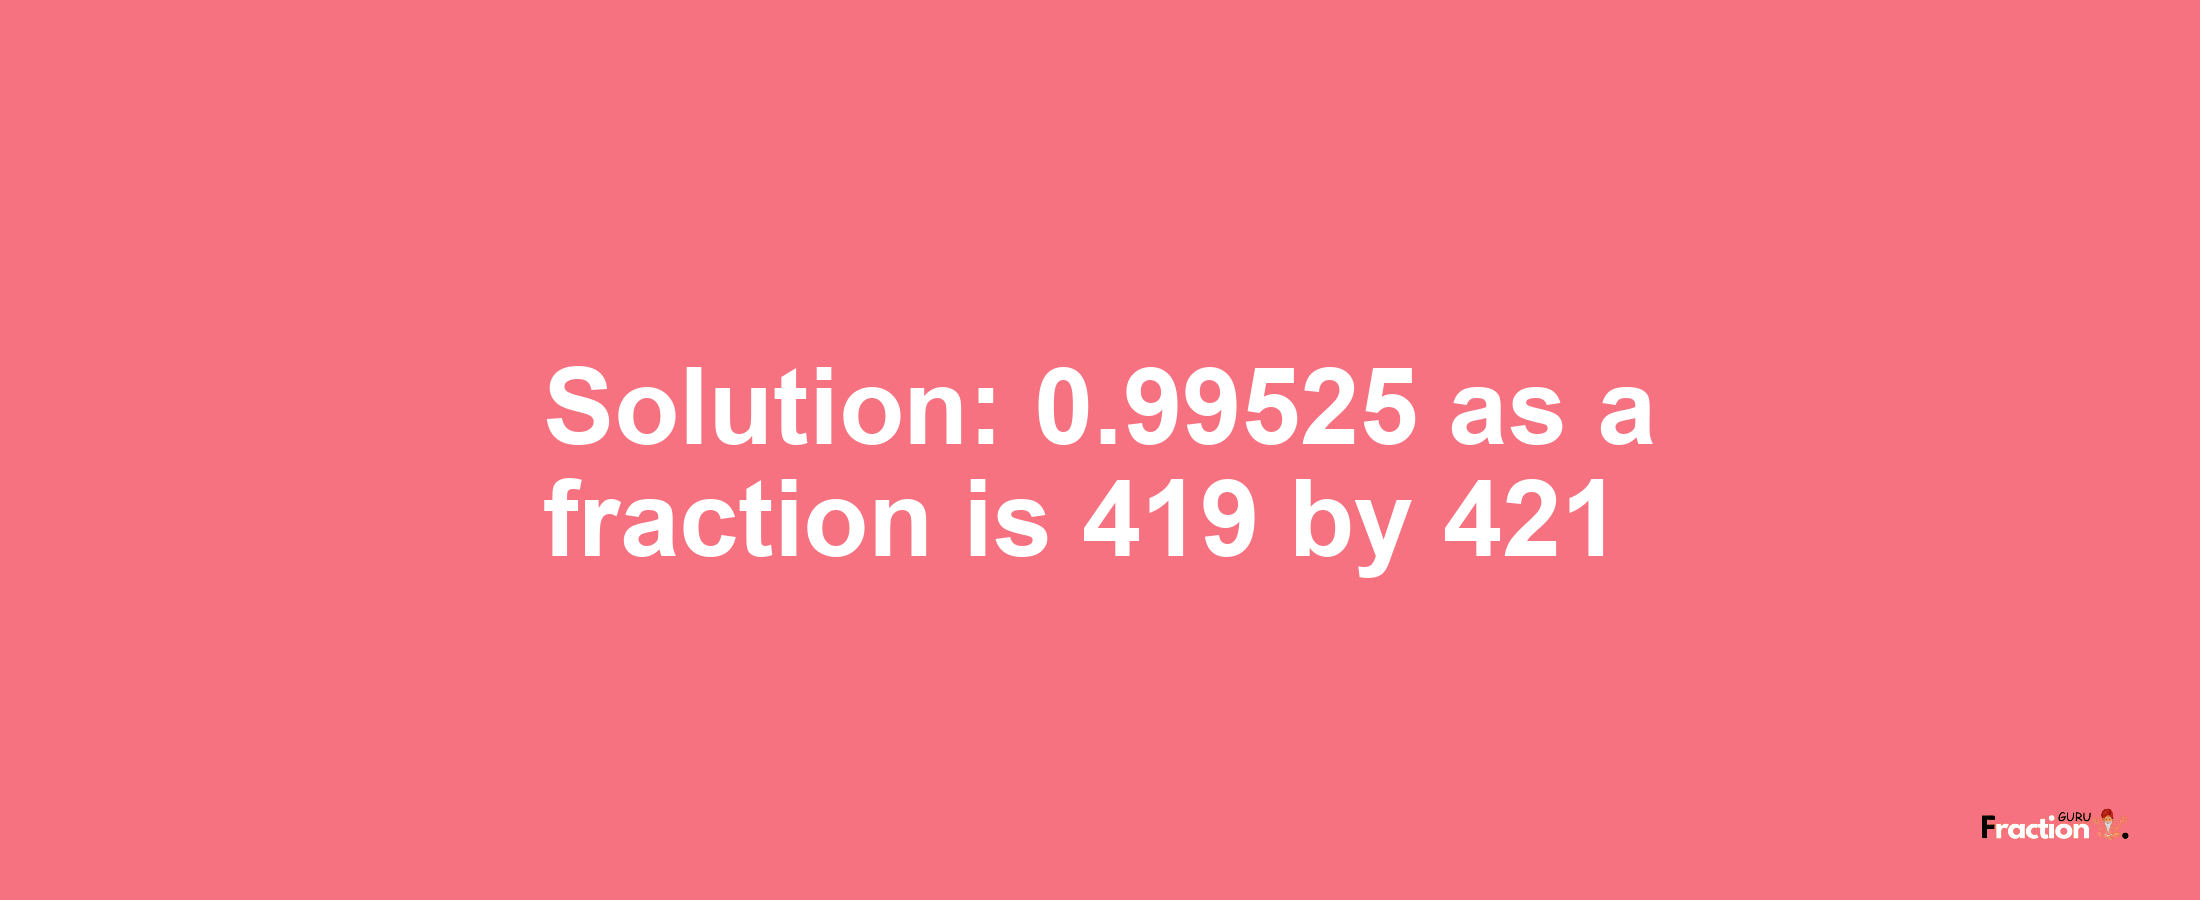 Solution:0.99525 as a fraction is 419/421